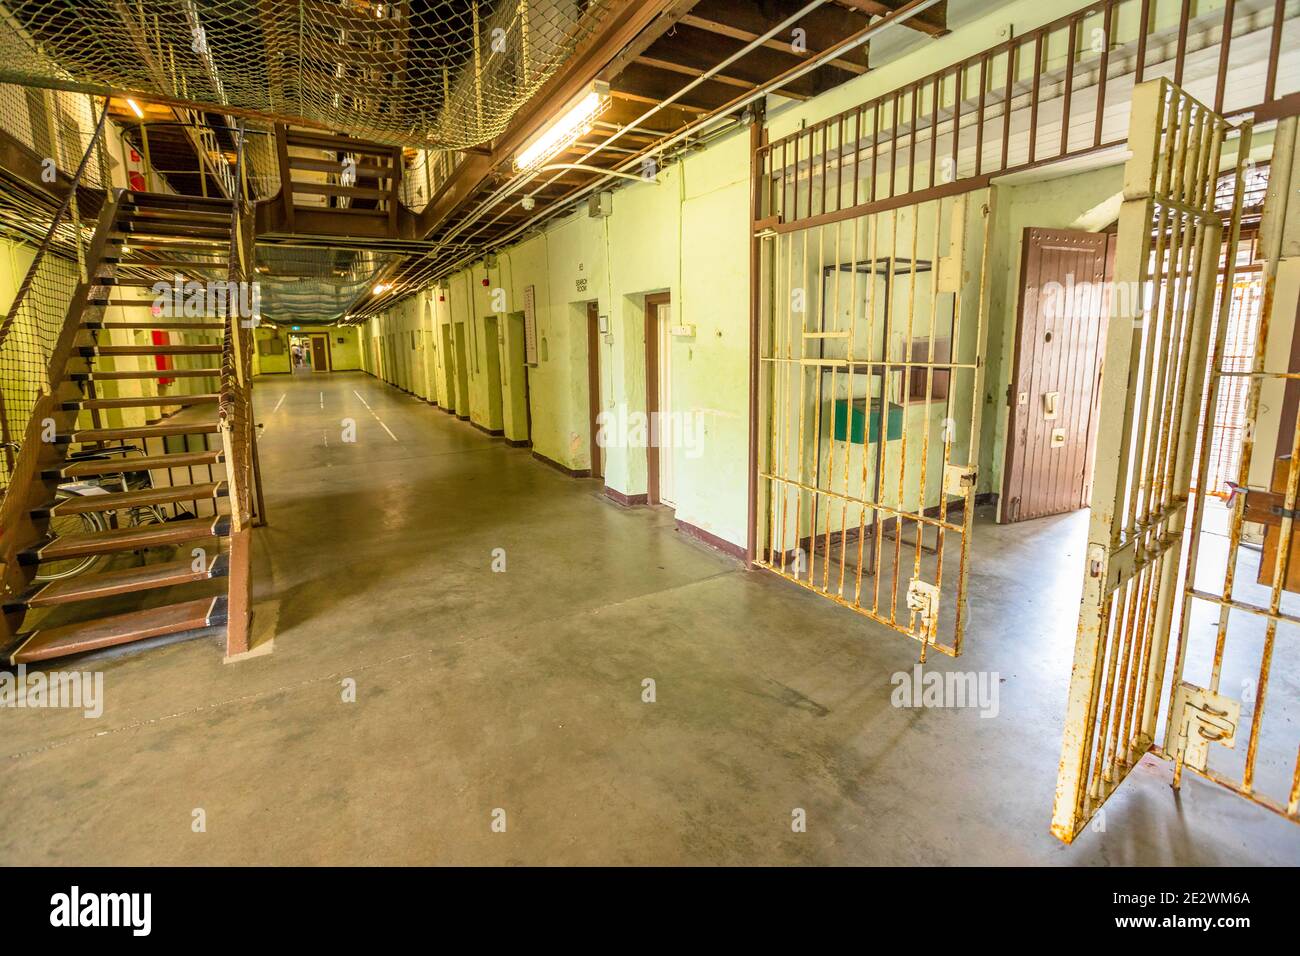 Fremantle, Western Australia - Jan 5, 2018: corridor and stairs inside main cell block of Fremantle Prison an old convicts jail built 1855, memorial Stock Photo